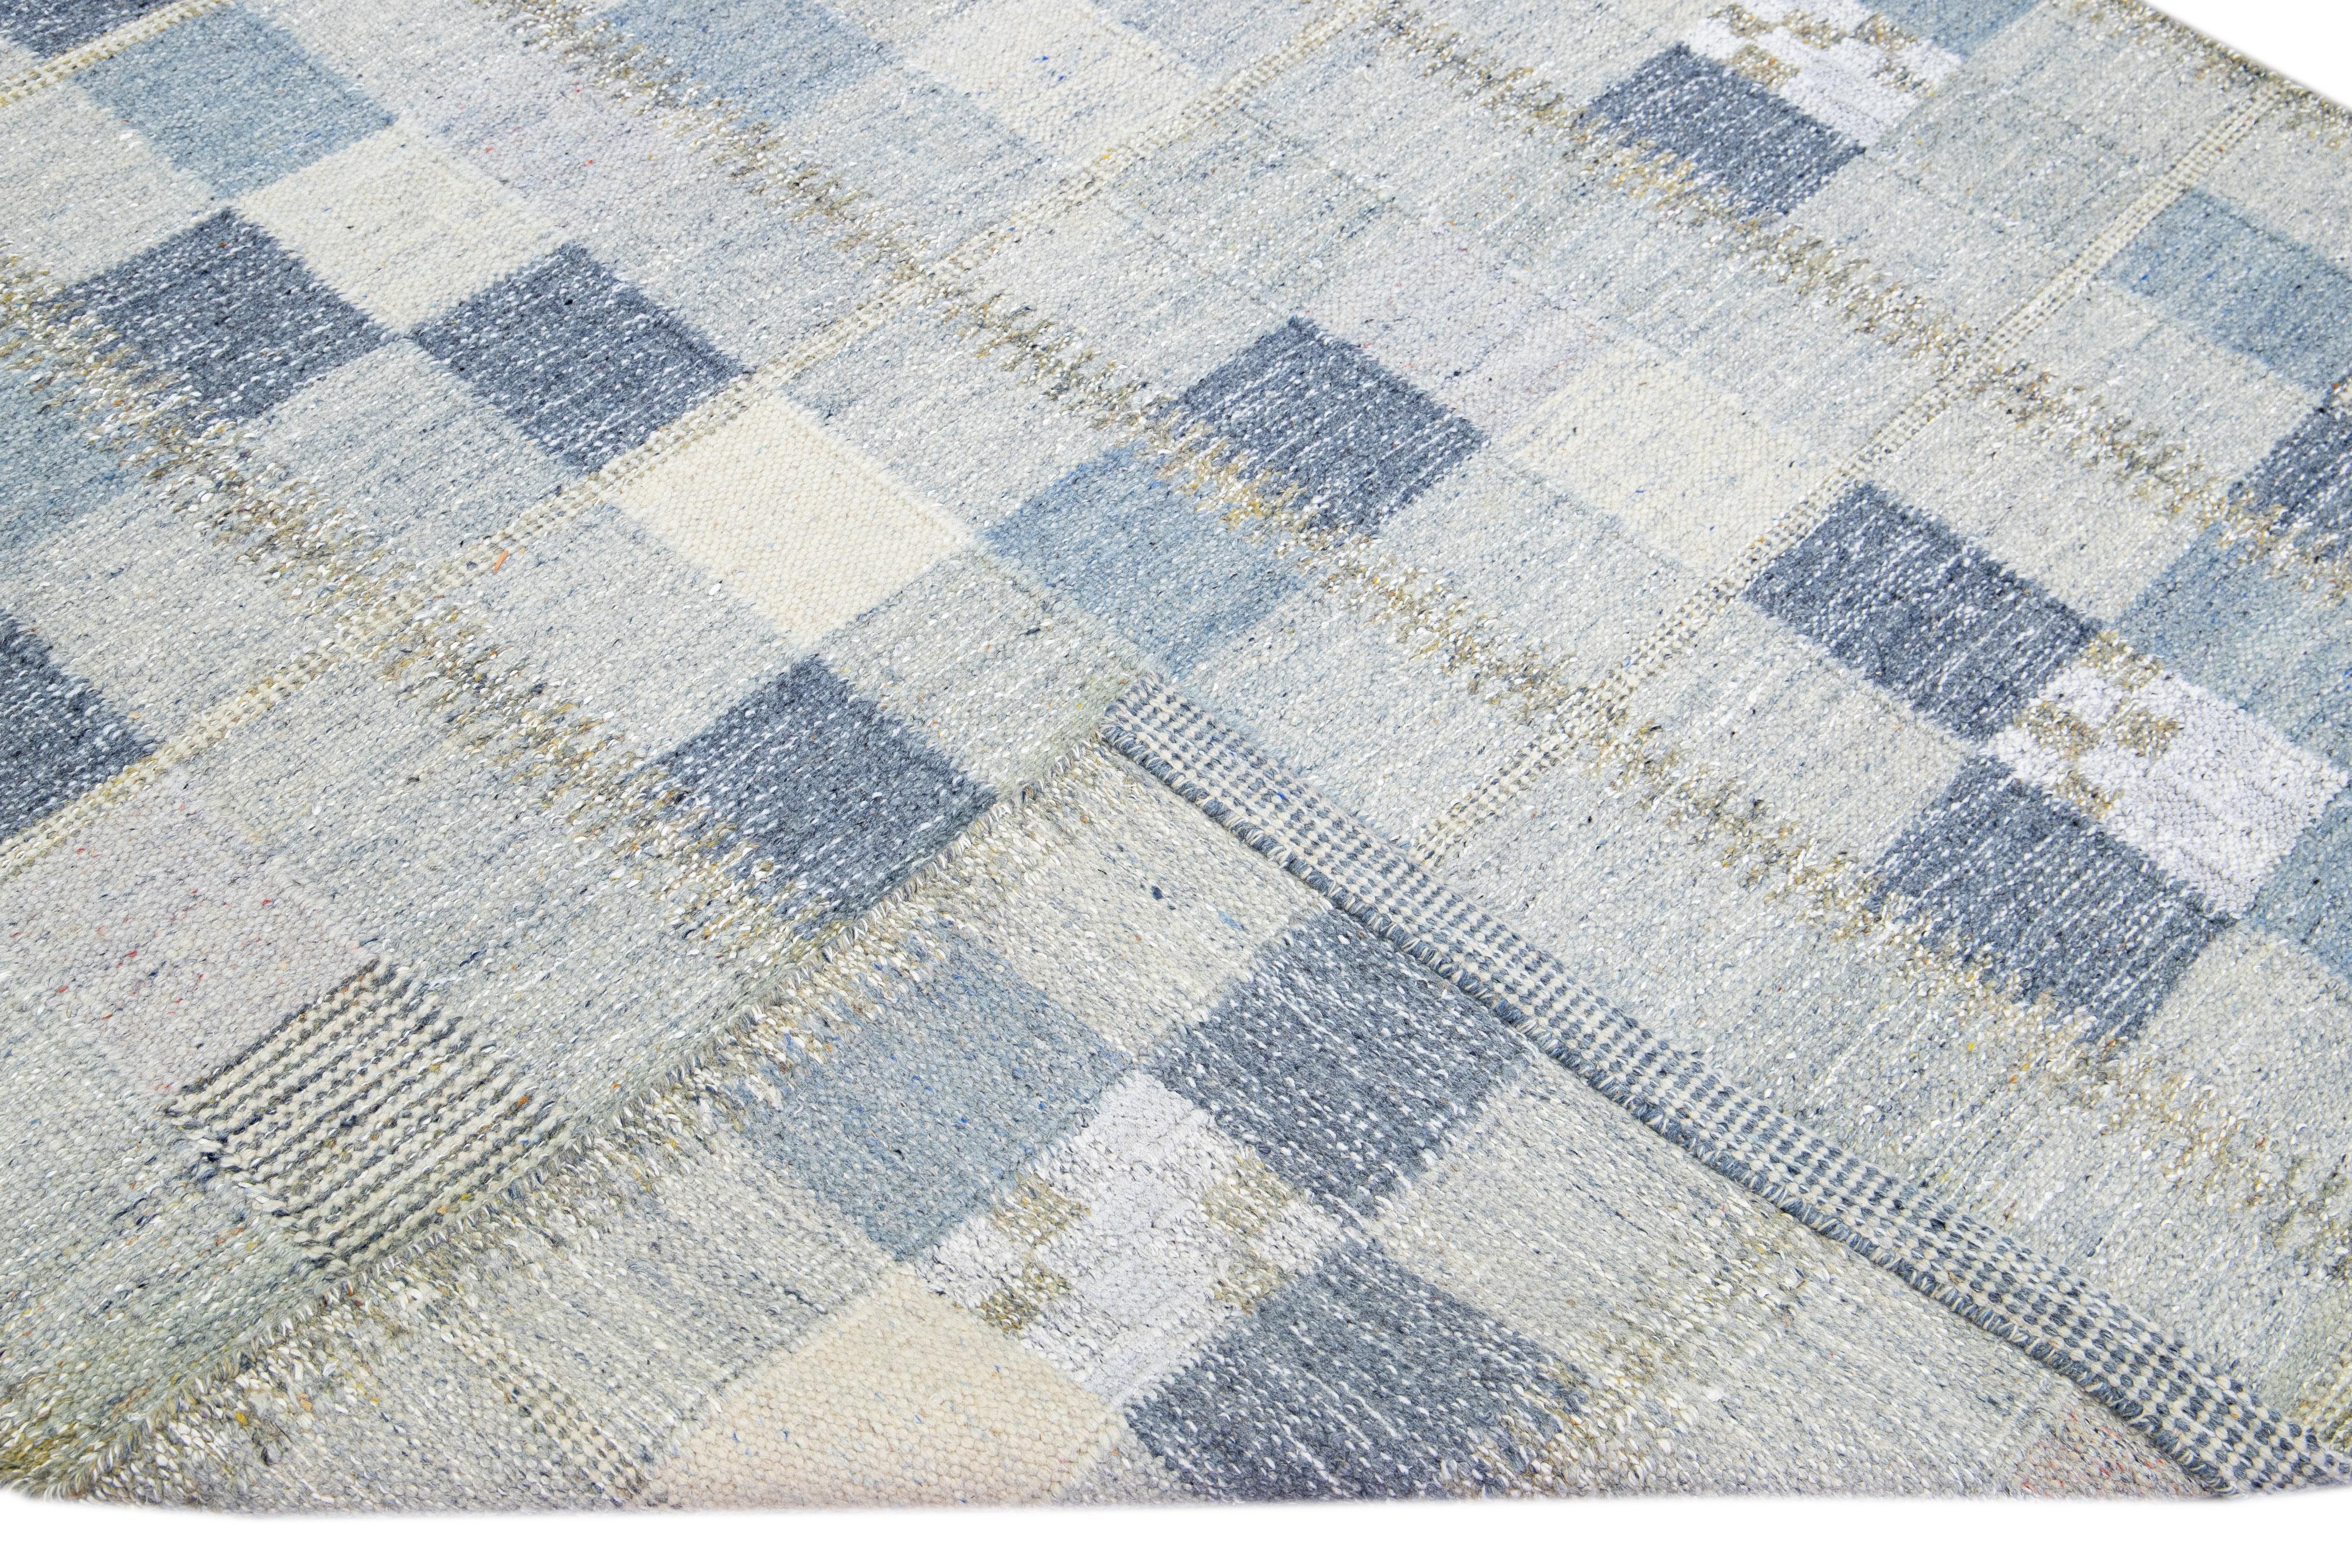 Beautiful Scandinavian style wool rug with blue and gray field. This modern rug has accents of white and yellow in a gorgeous all-over geometric pattern design.

 This rug measures: 6'1